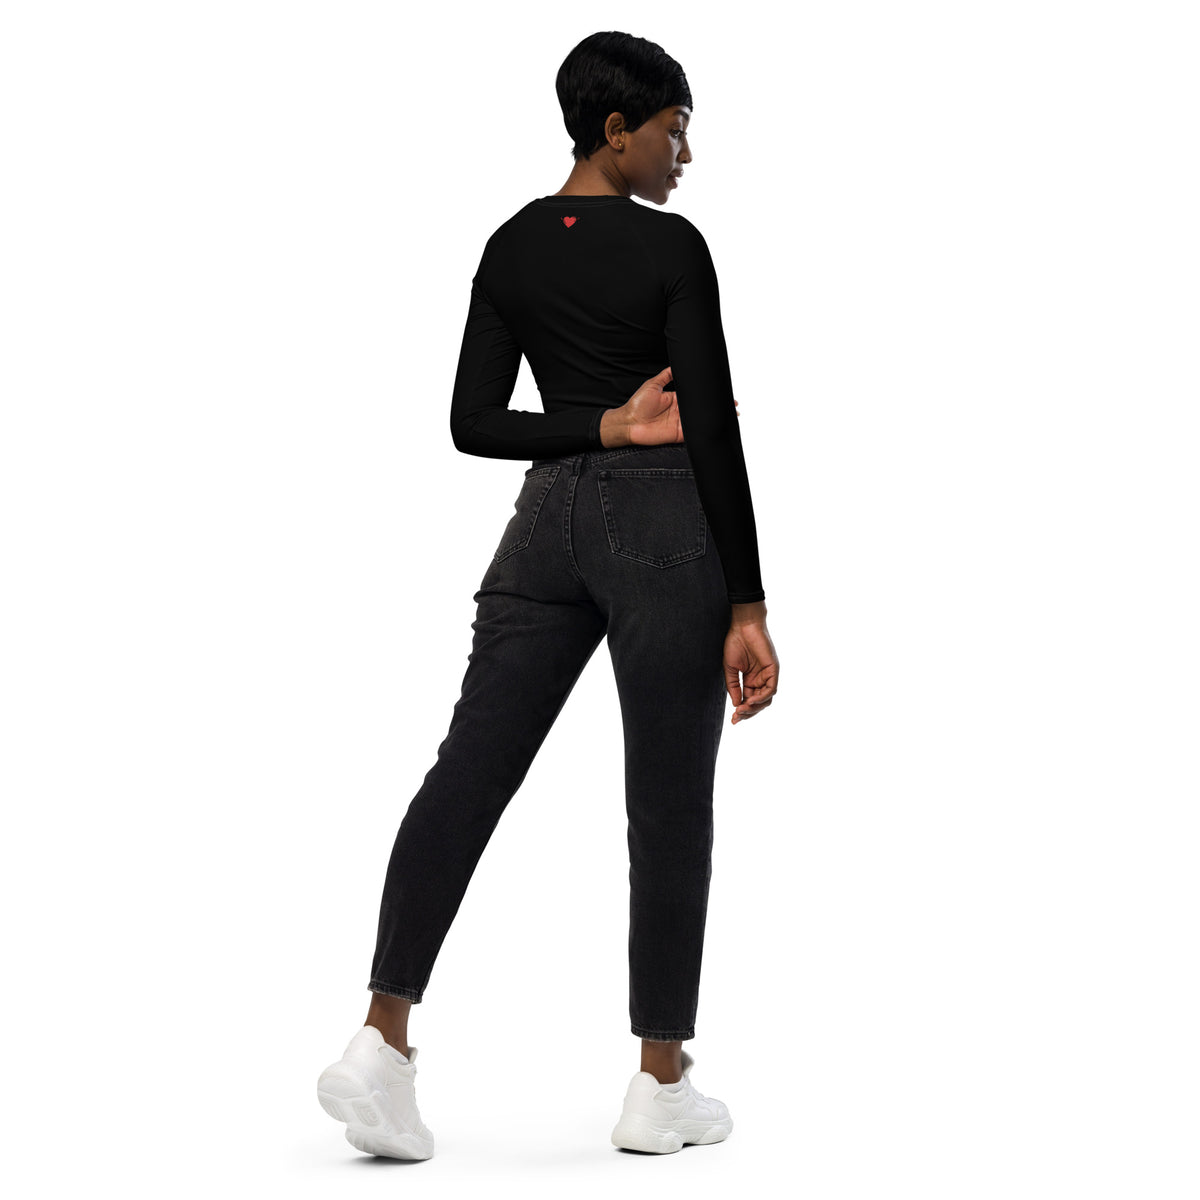 All Black Recycled Long-Sleeve Crop Top